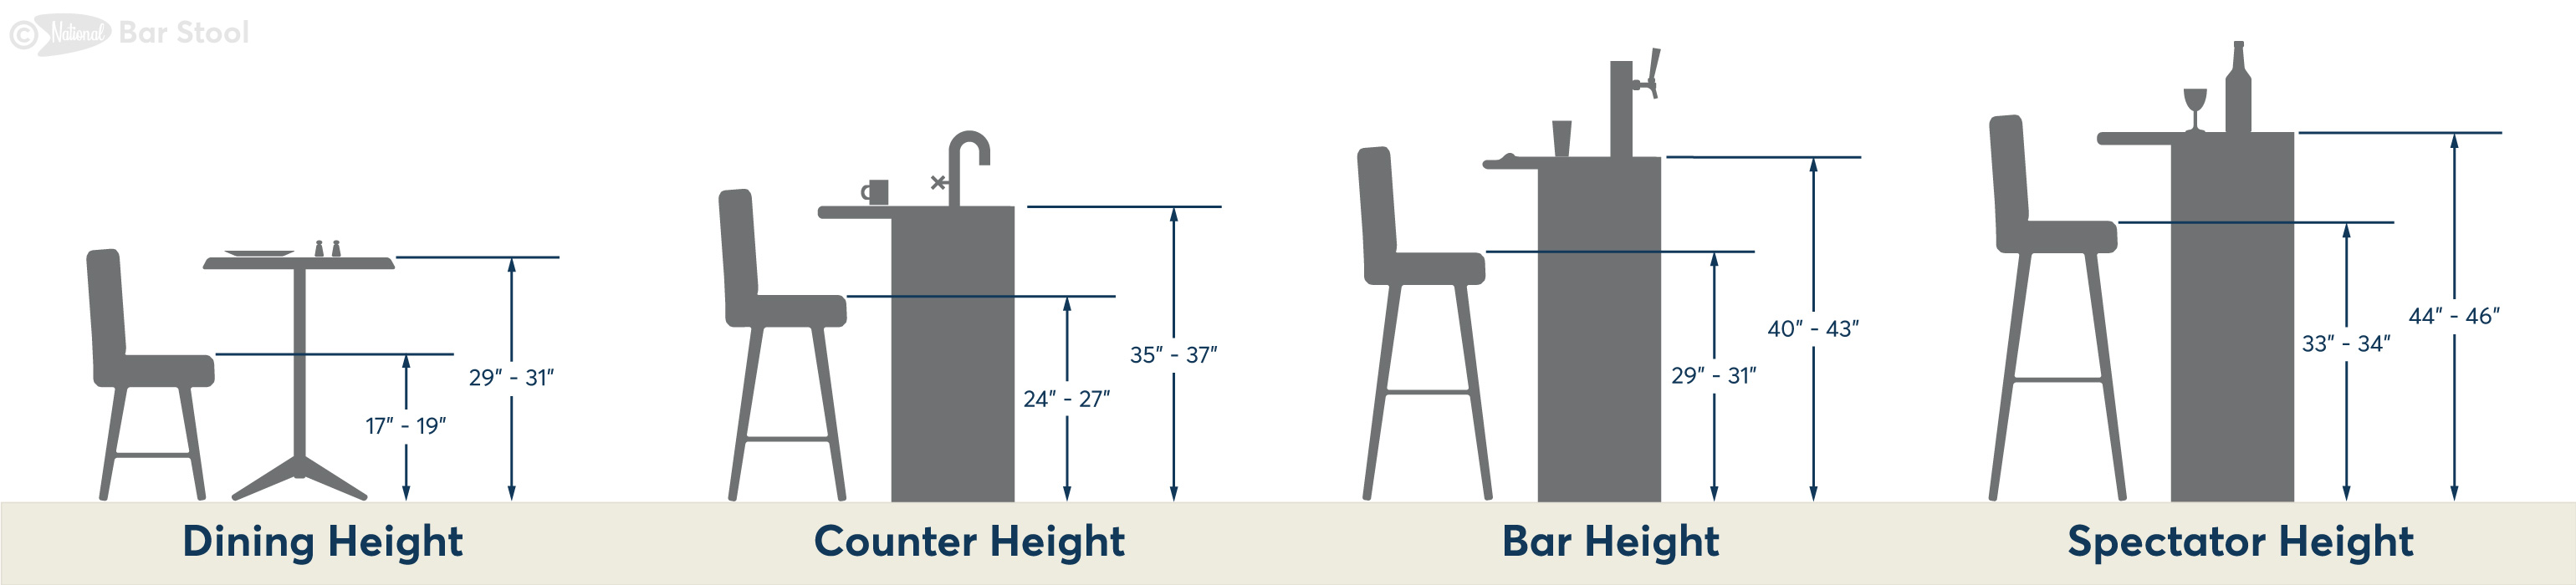 Bar Stool Ing Guide National, How Much Space Do You Need For Bar Stools